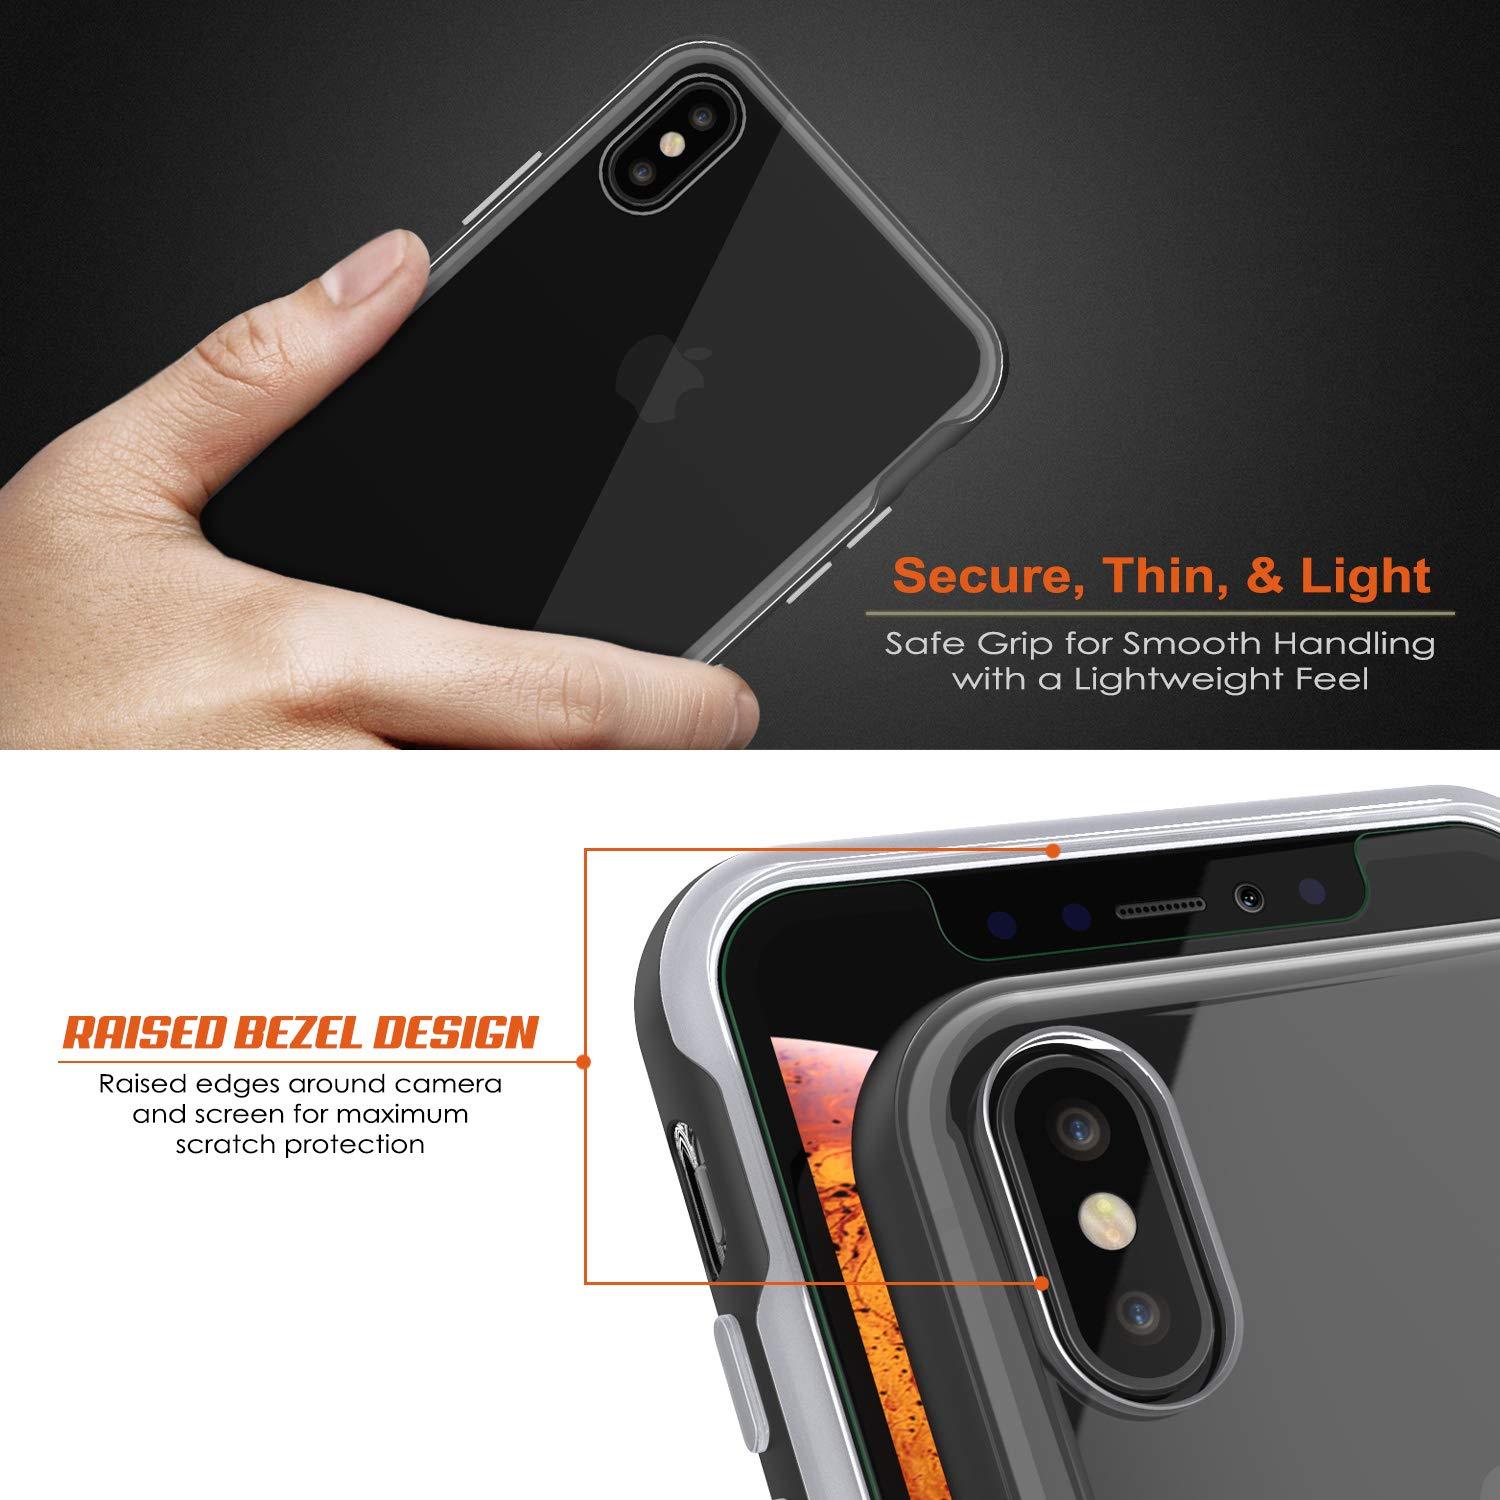 iPhone XS Max Case, PUNKcase [LUCID 3.0 Series] [Slim Fit] Armor Cover w/ Integrated Screen Protector [Black]